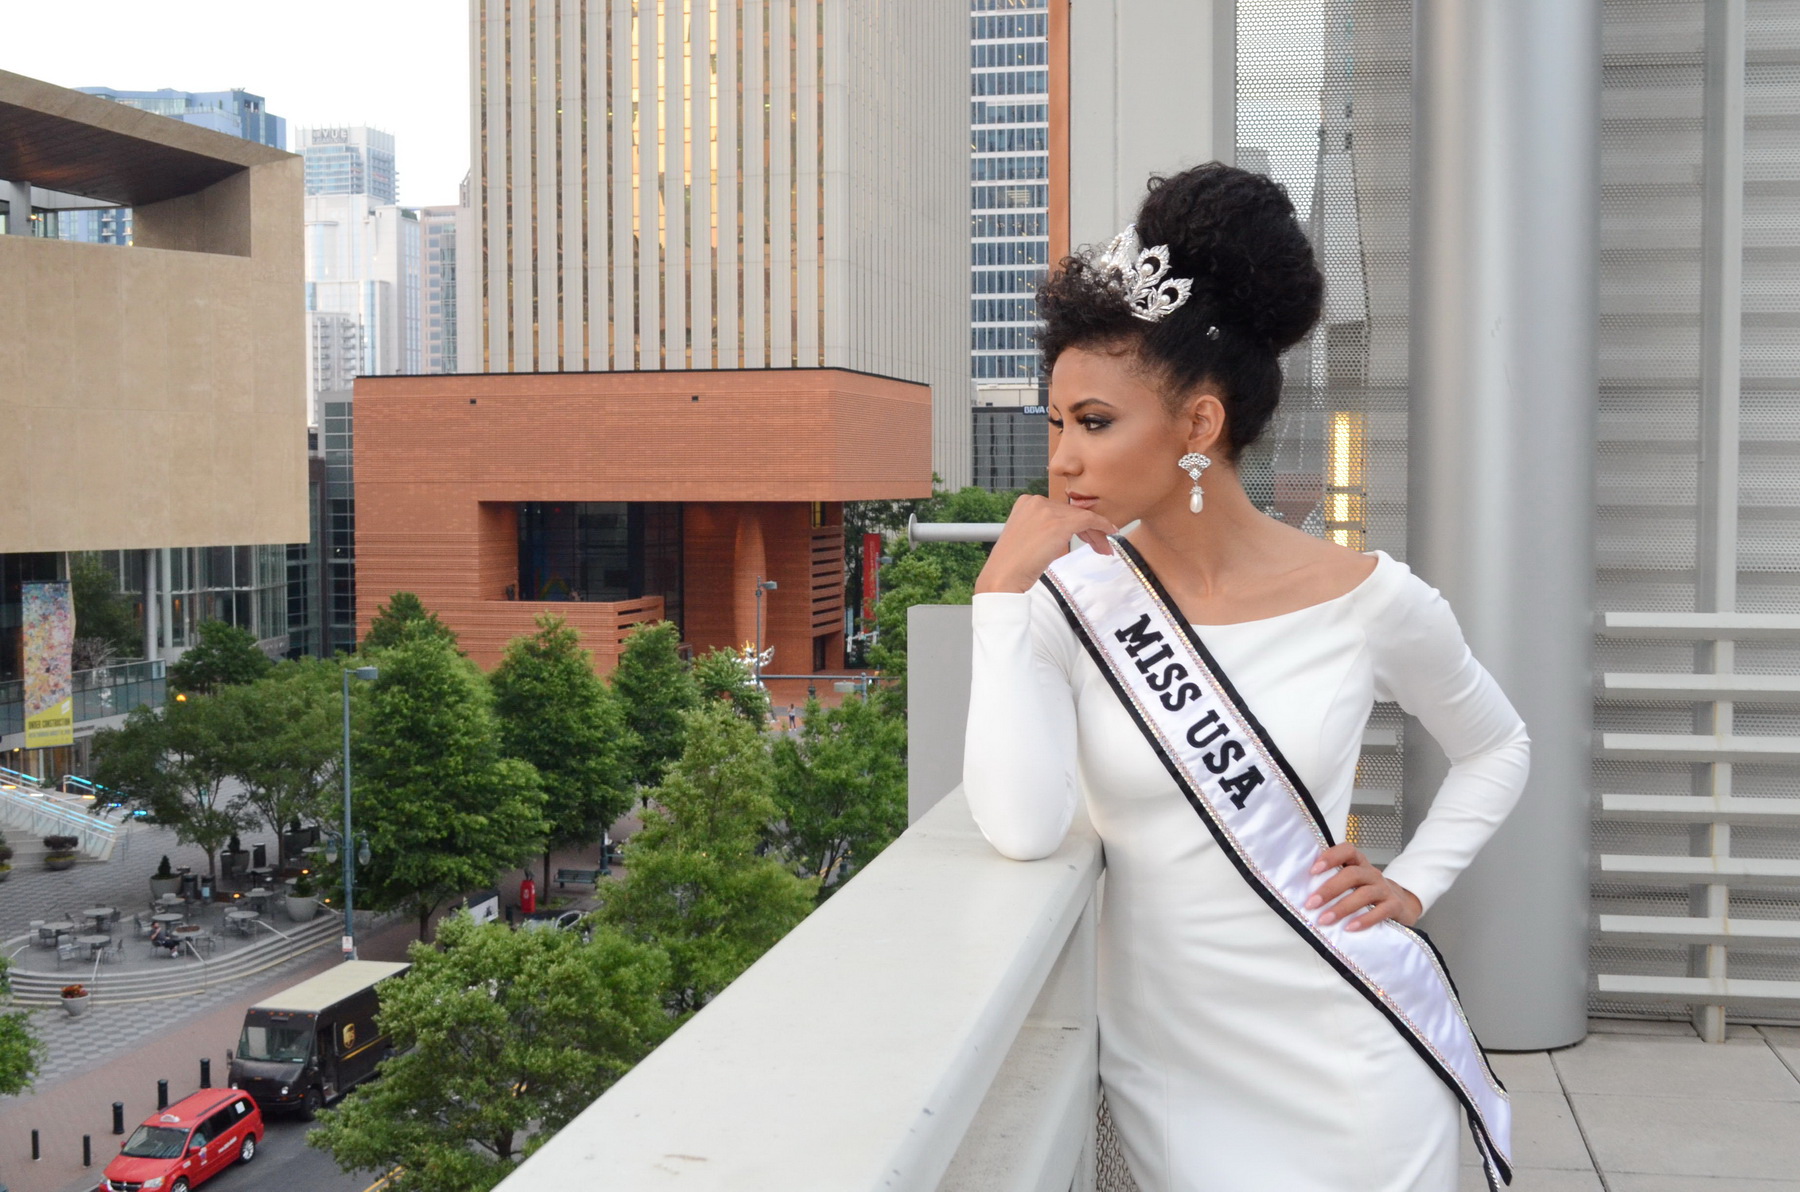  Miss USA Cheslie Kryst, a Charlotte attorney and the reigning Miss North Carolina USA, was celebrated by her family and friends at a private event at the Harvey B. Gantt Center for African-American Arts + Culture.  Cheslie also volunteers as a membe